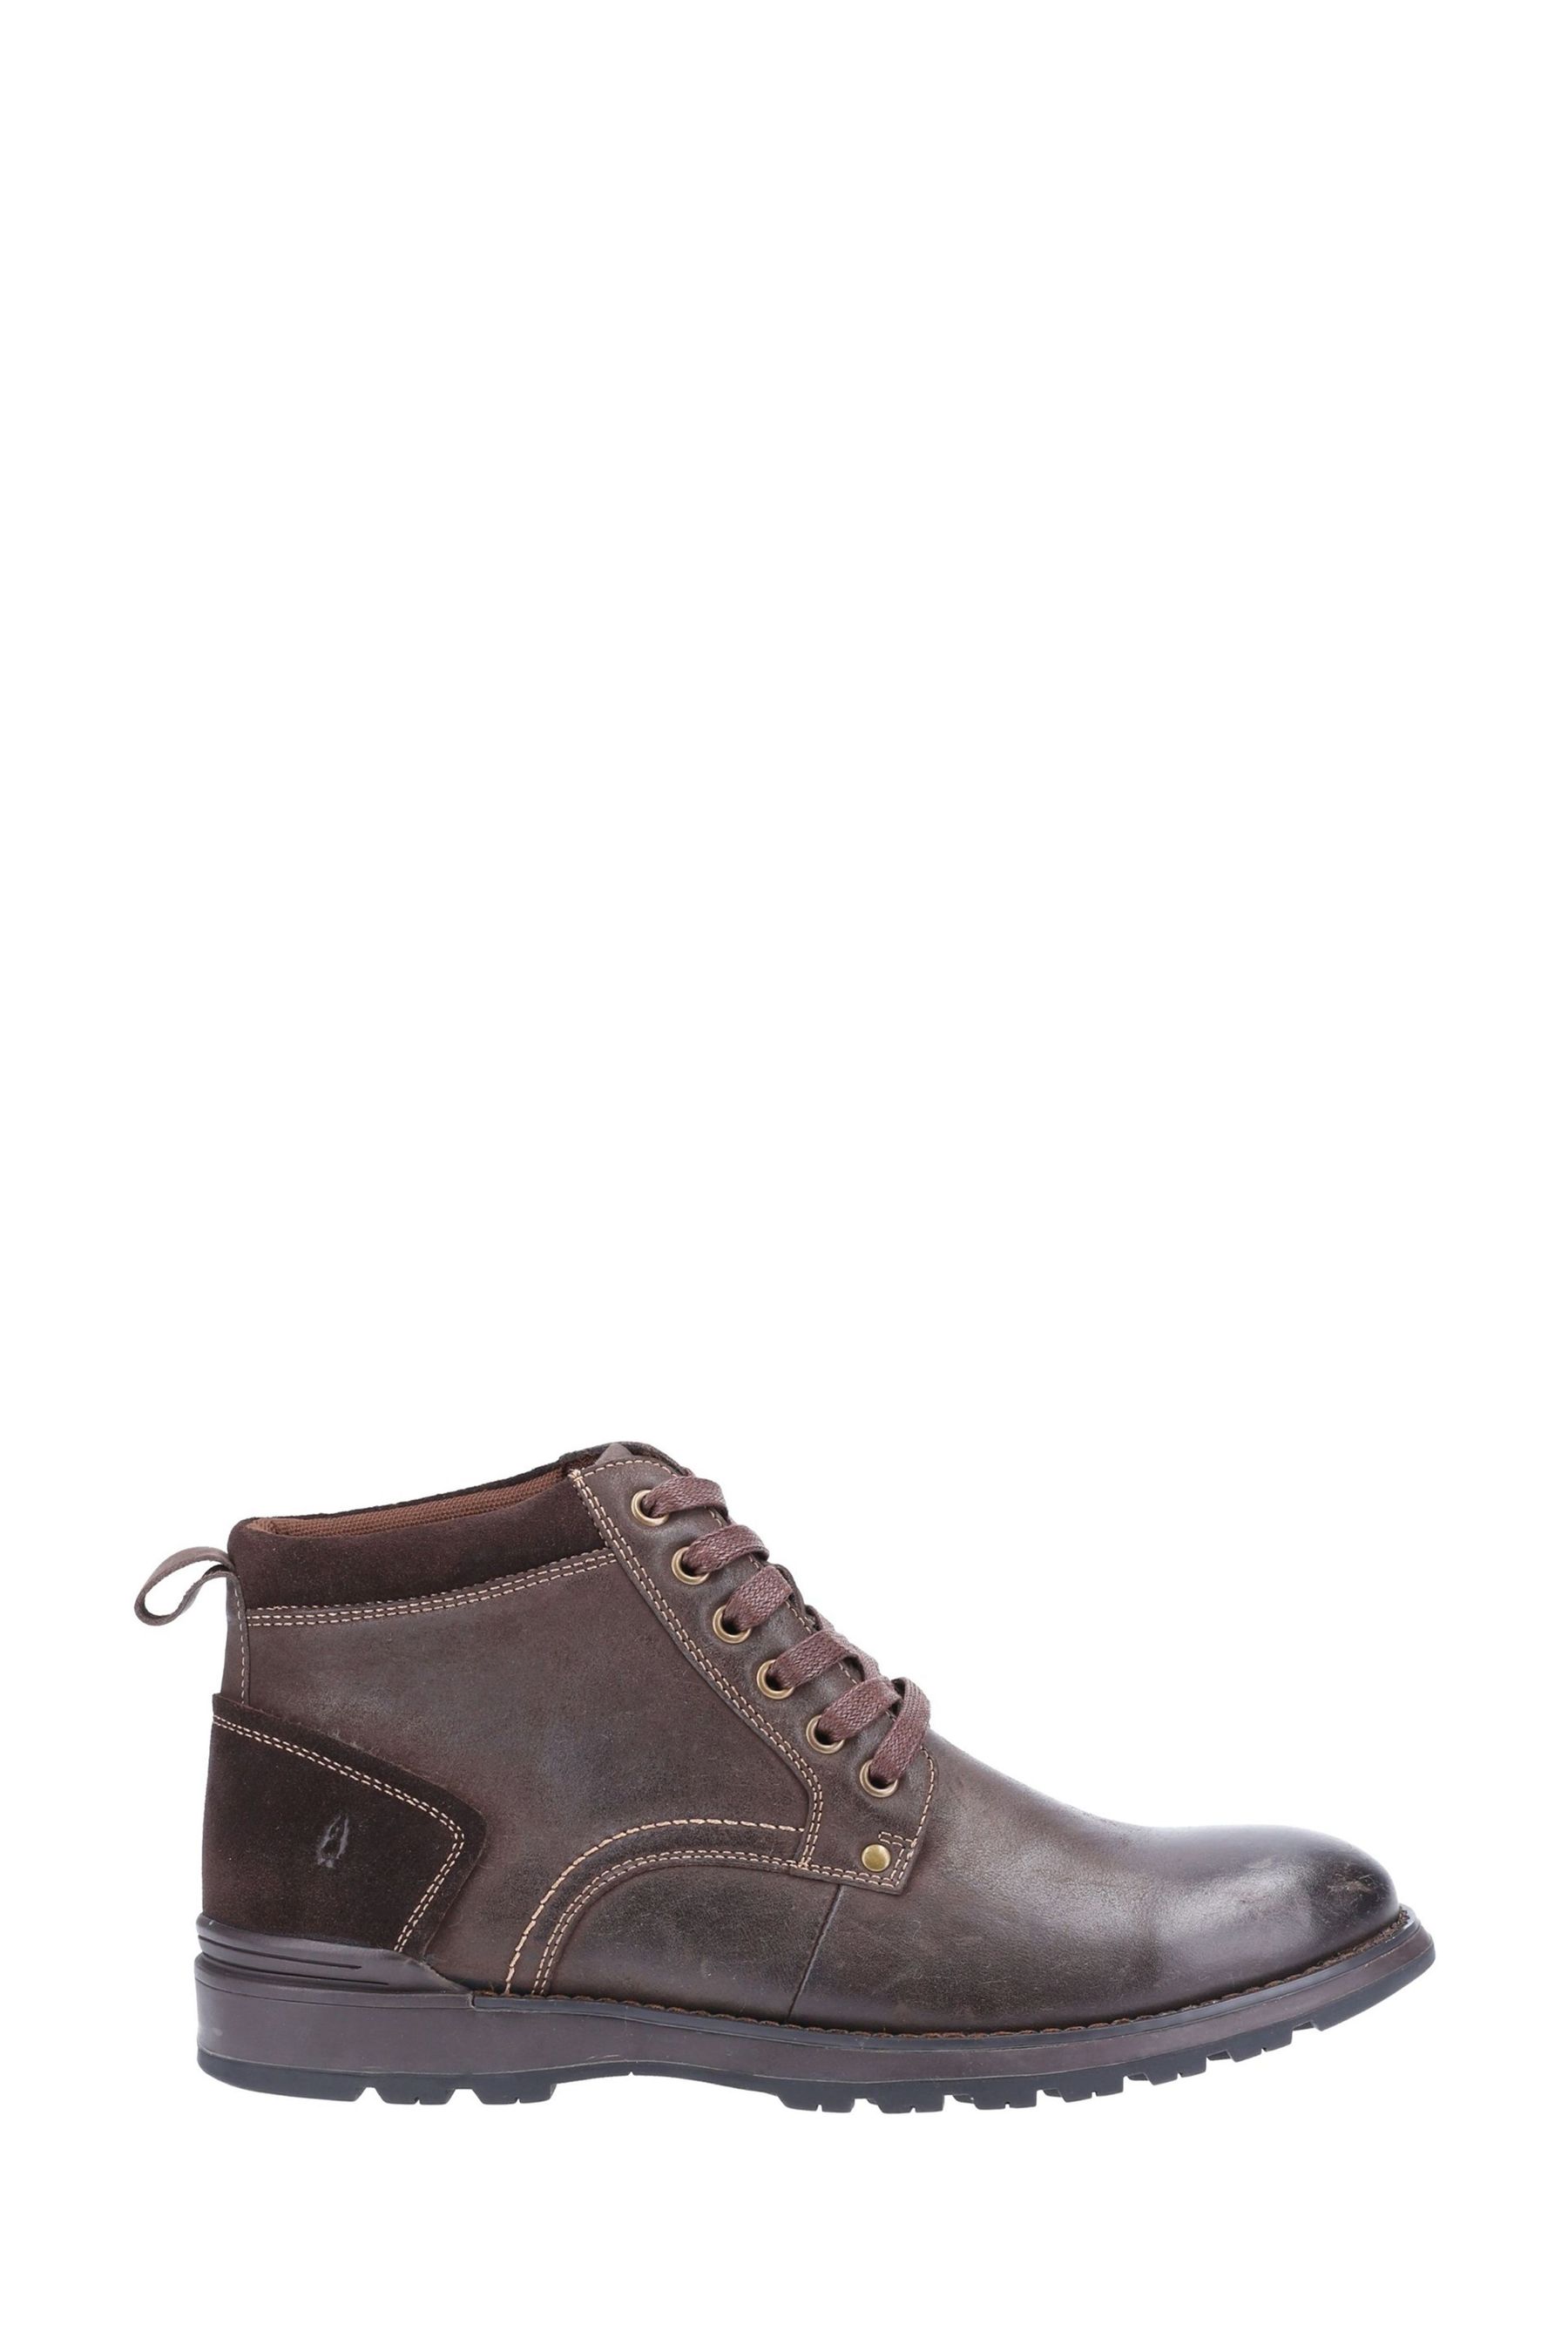 Buy Hush Puppies Dean Lace-Up Boots from the Next UK online shop